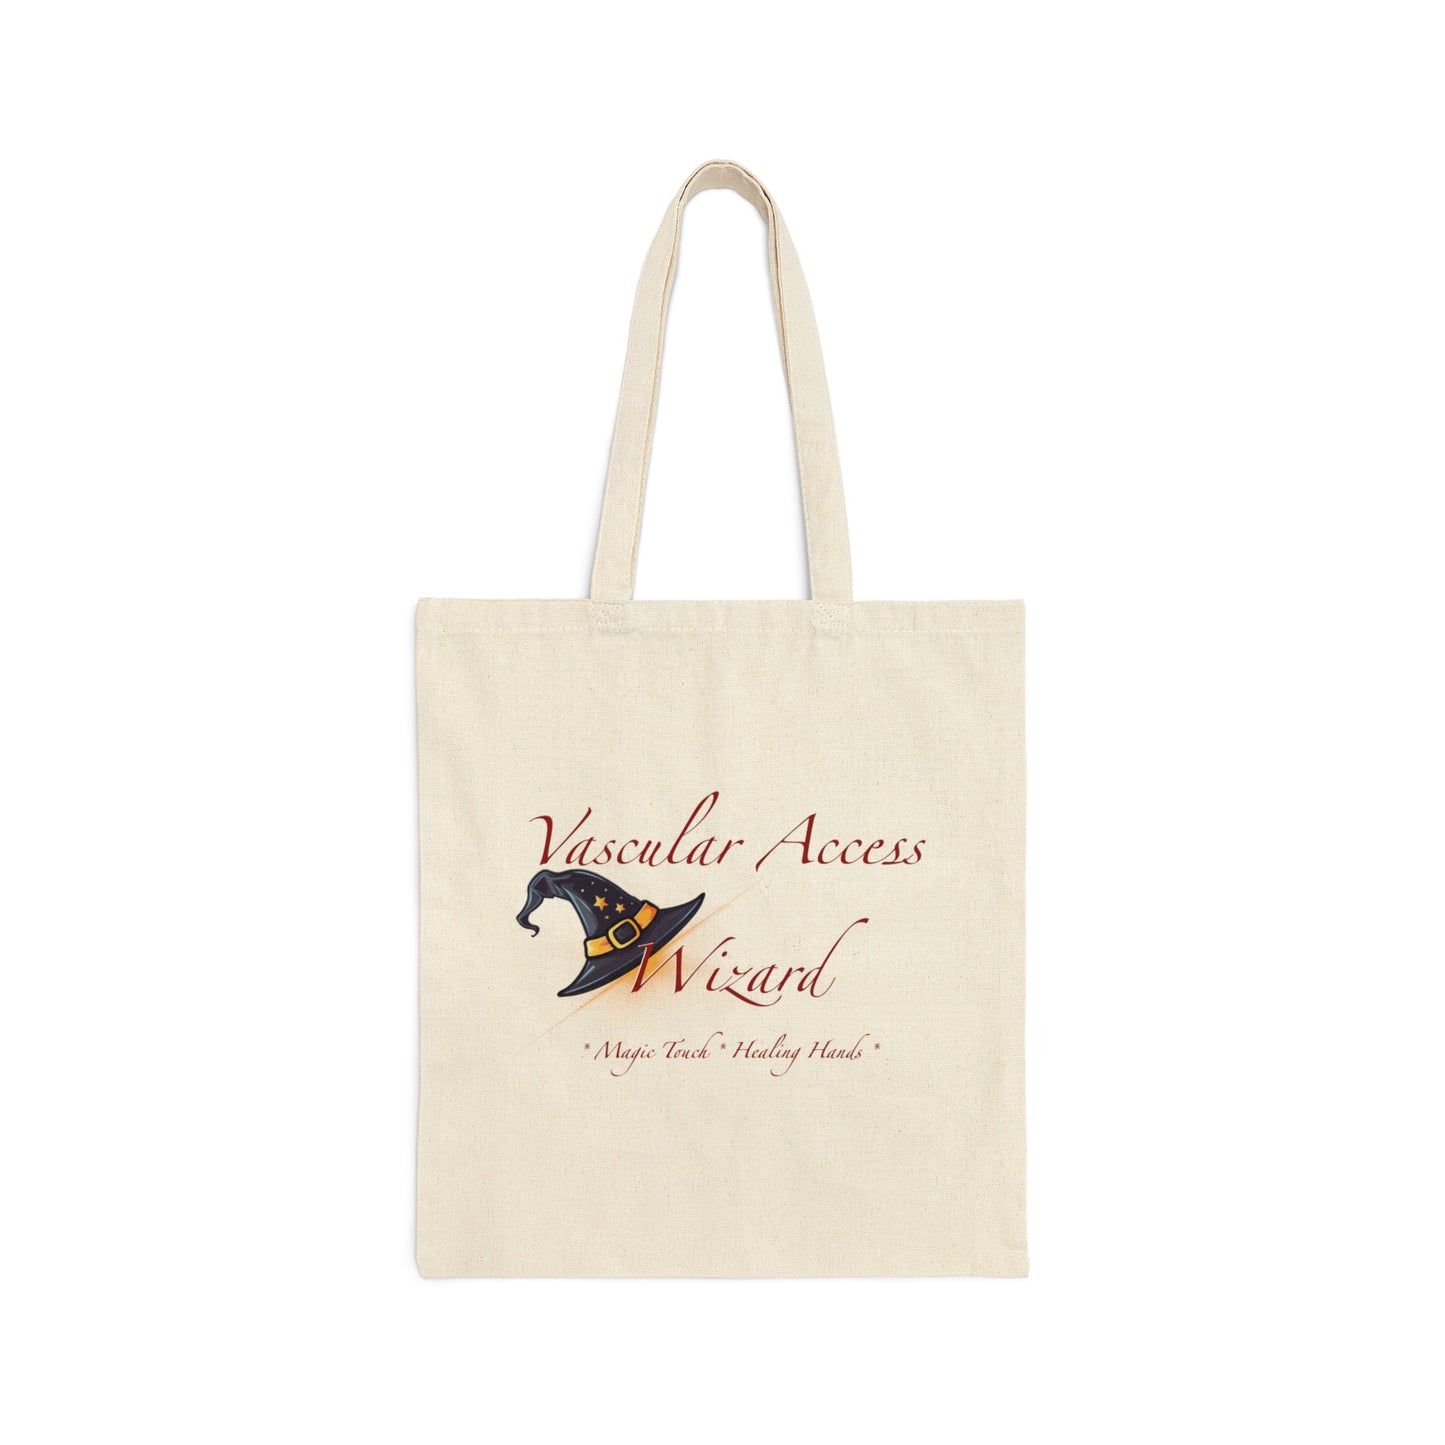 Vascular Access Wizard Canvas Tote Bag